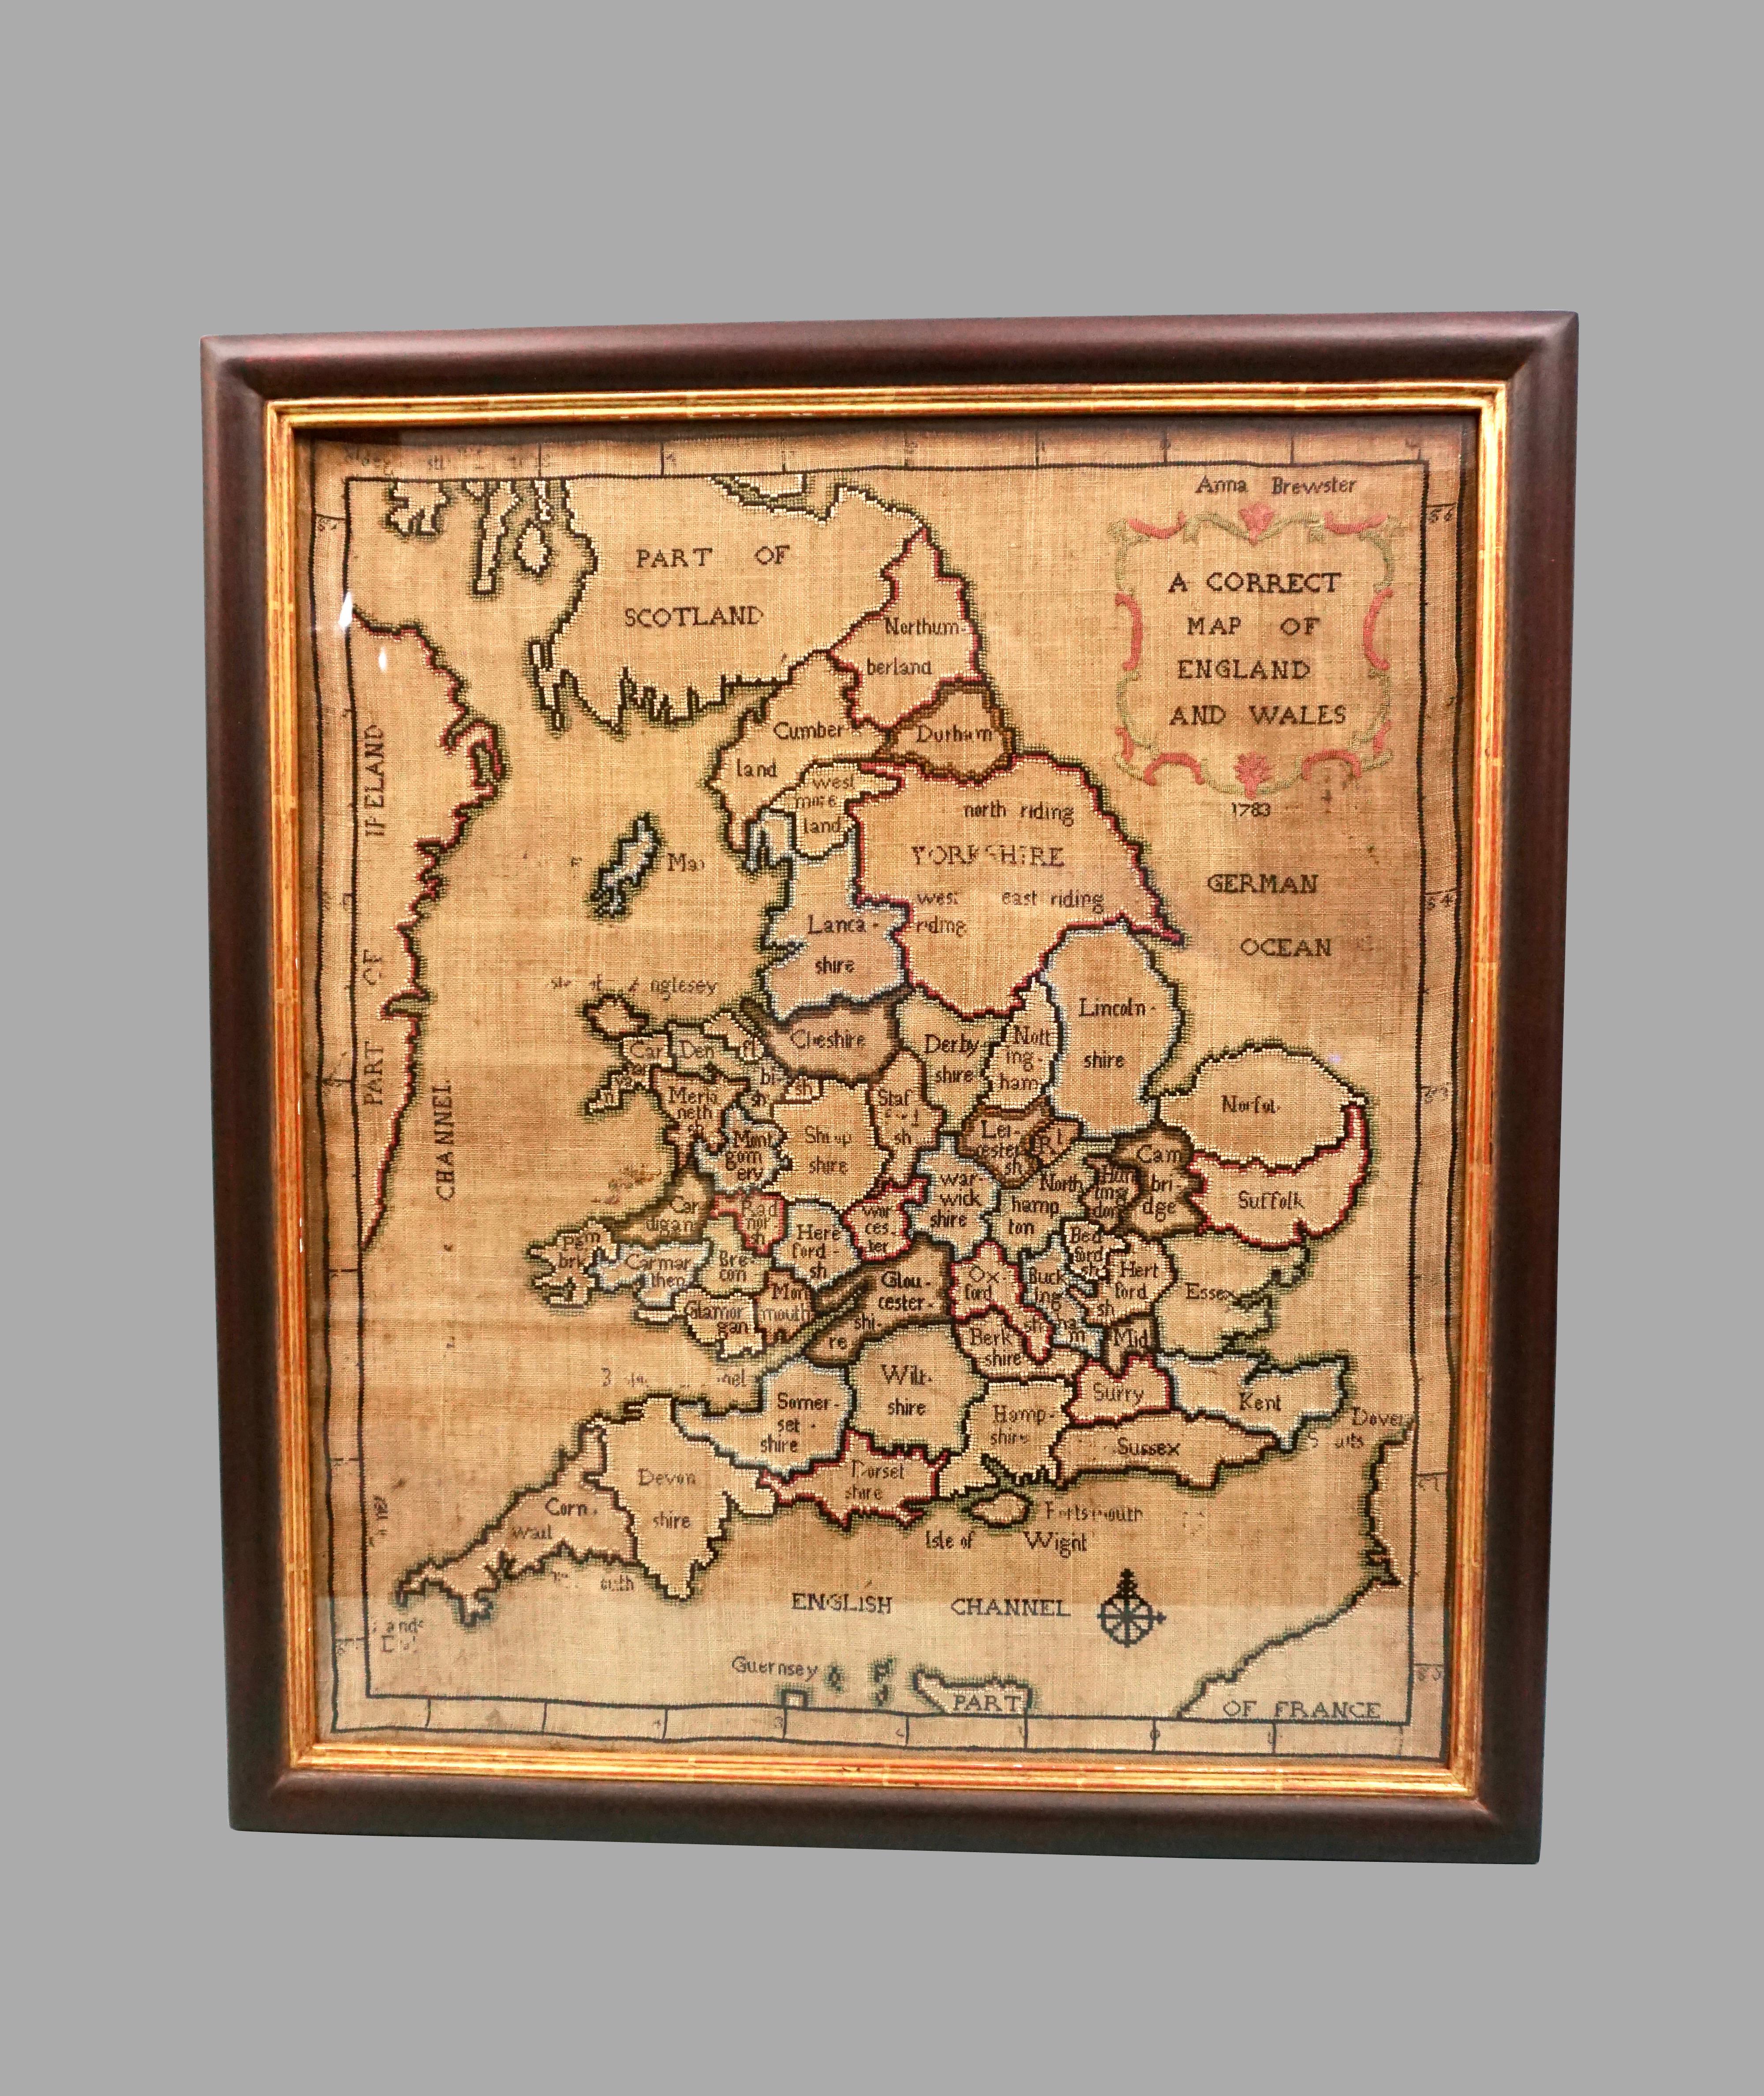 A charming silk needlework depiction of England and Wales executed in 1783 by Anna Brewster. This Georgian map sampler is signed and dated in the upper left hand corner, mounted and framed. Brewster was undoubtedly a young school girl and this sort